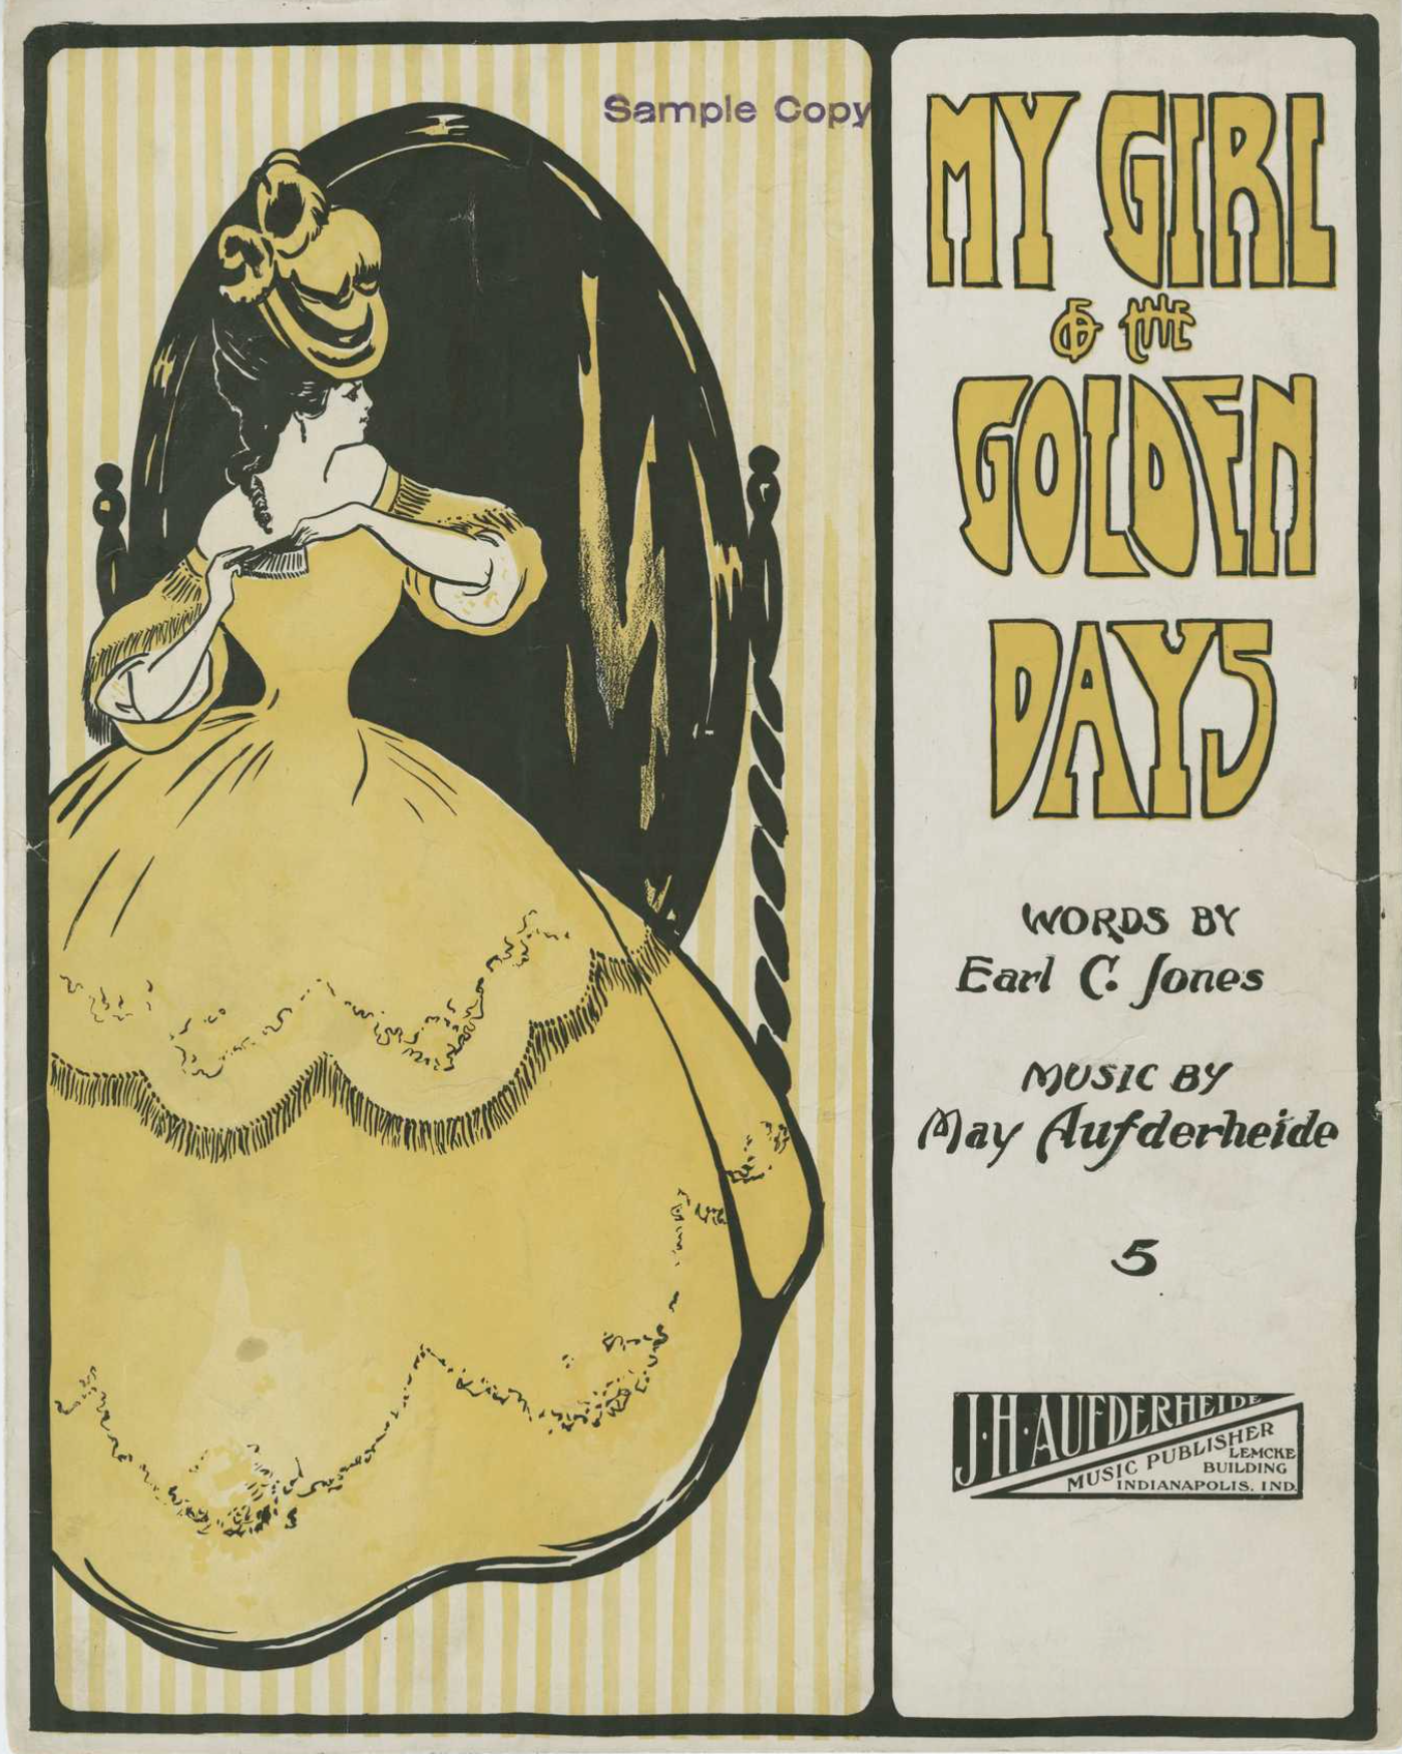 Cover of sheet music for "My Girl of the Golden Days." The cover features an illustration of a woman in a large dress, and she is standing in front of a full length mirror. 